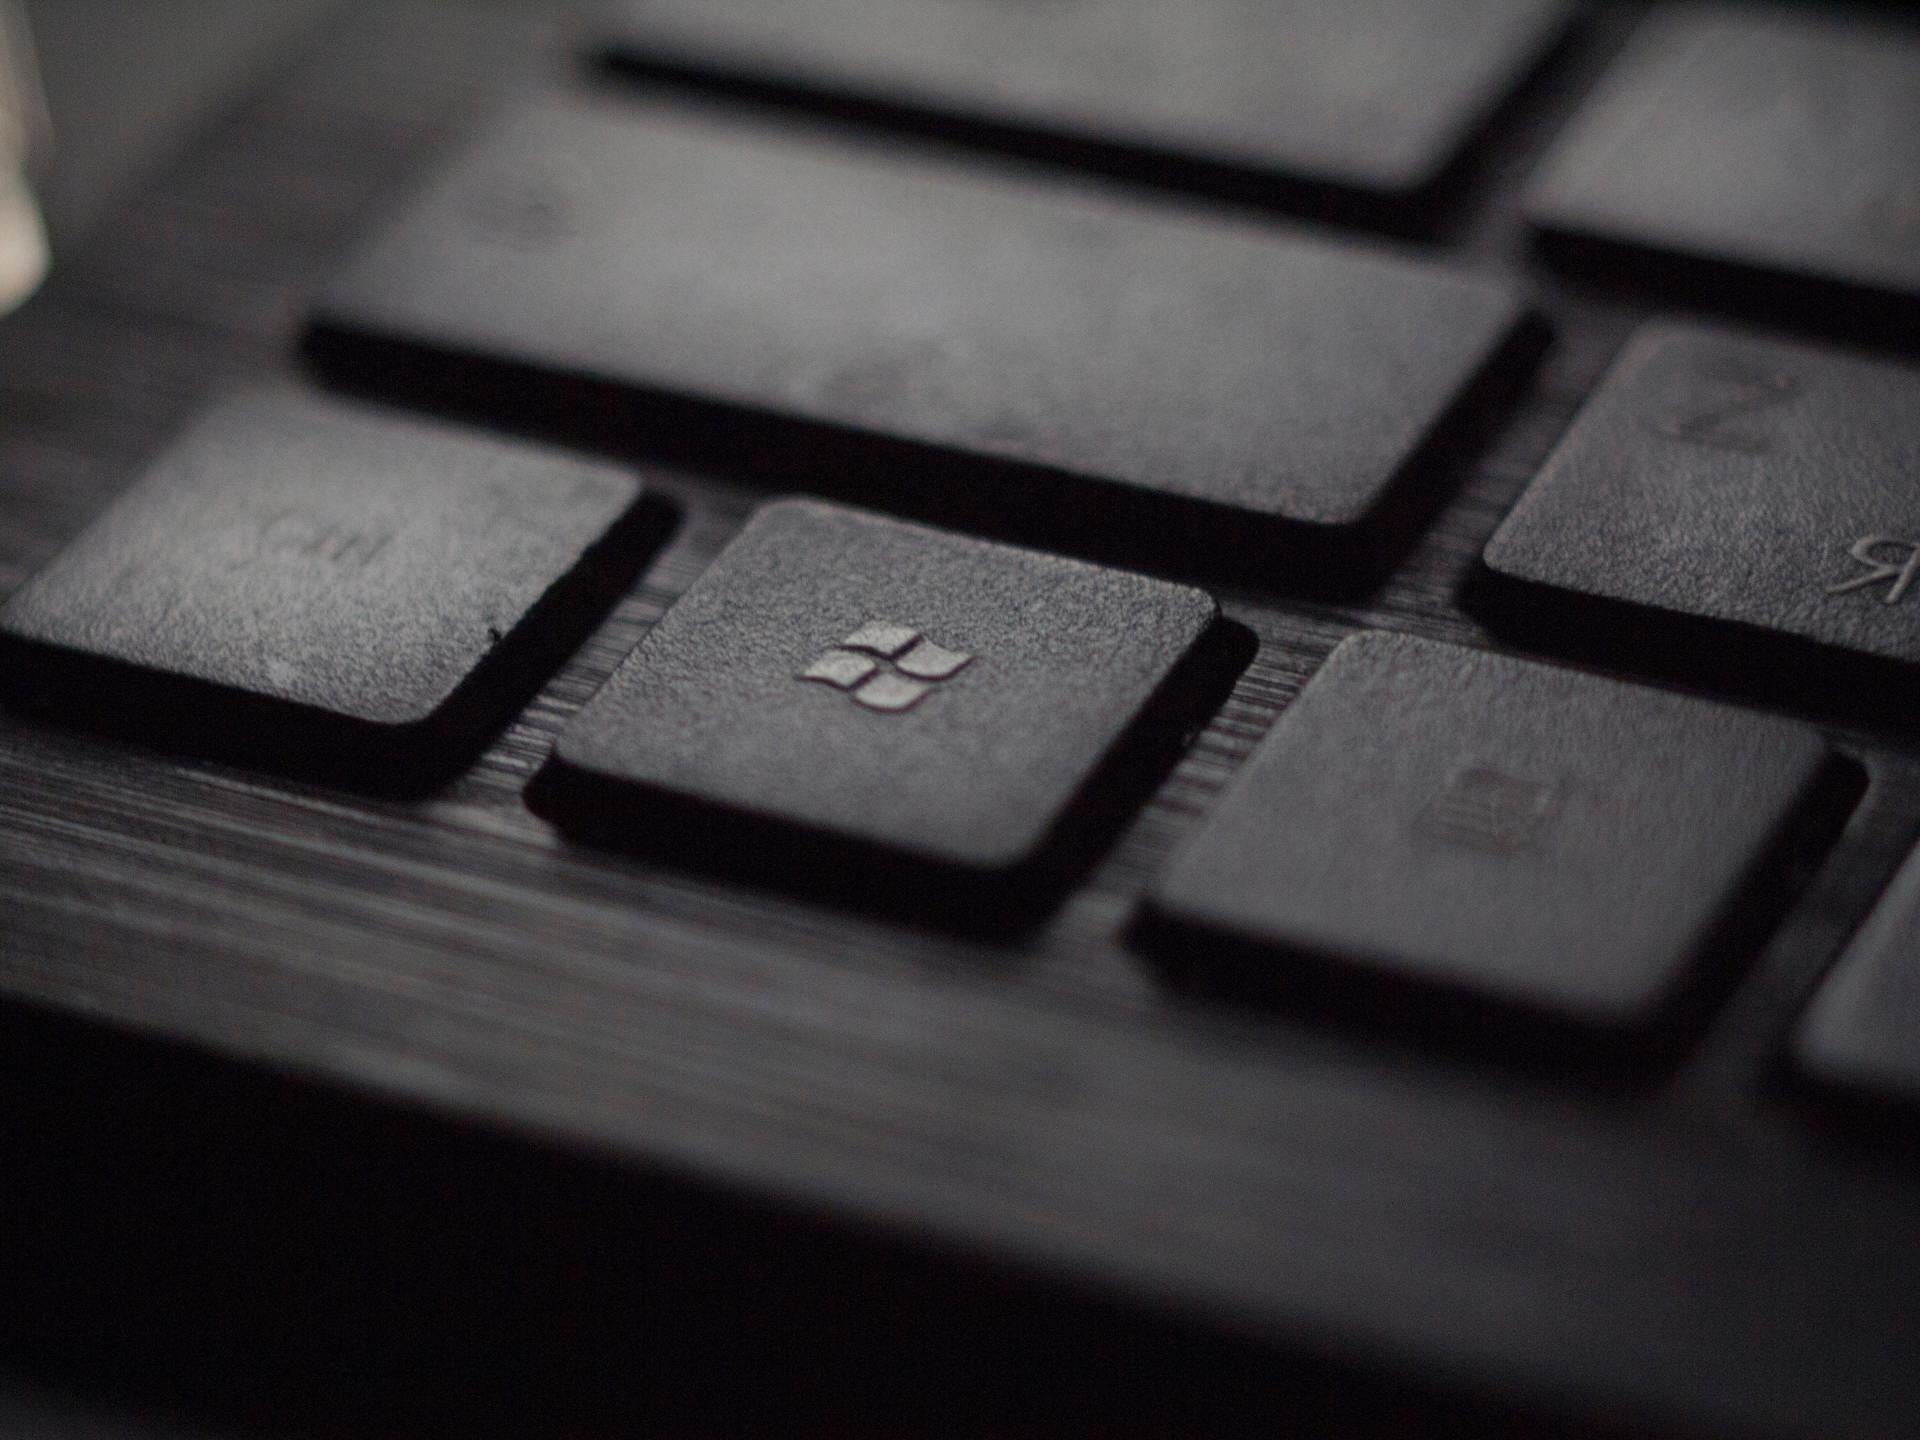 A close up of a black keyboard with the windows key in the middle